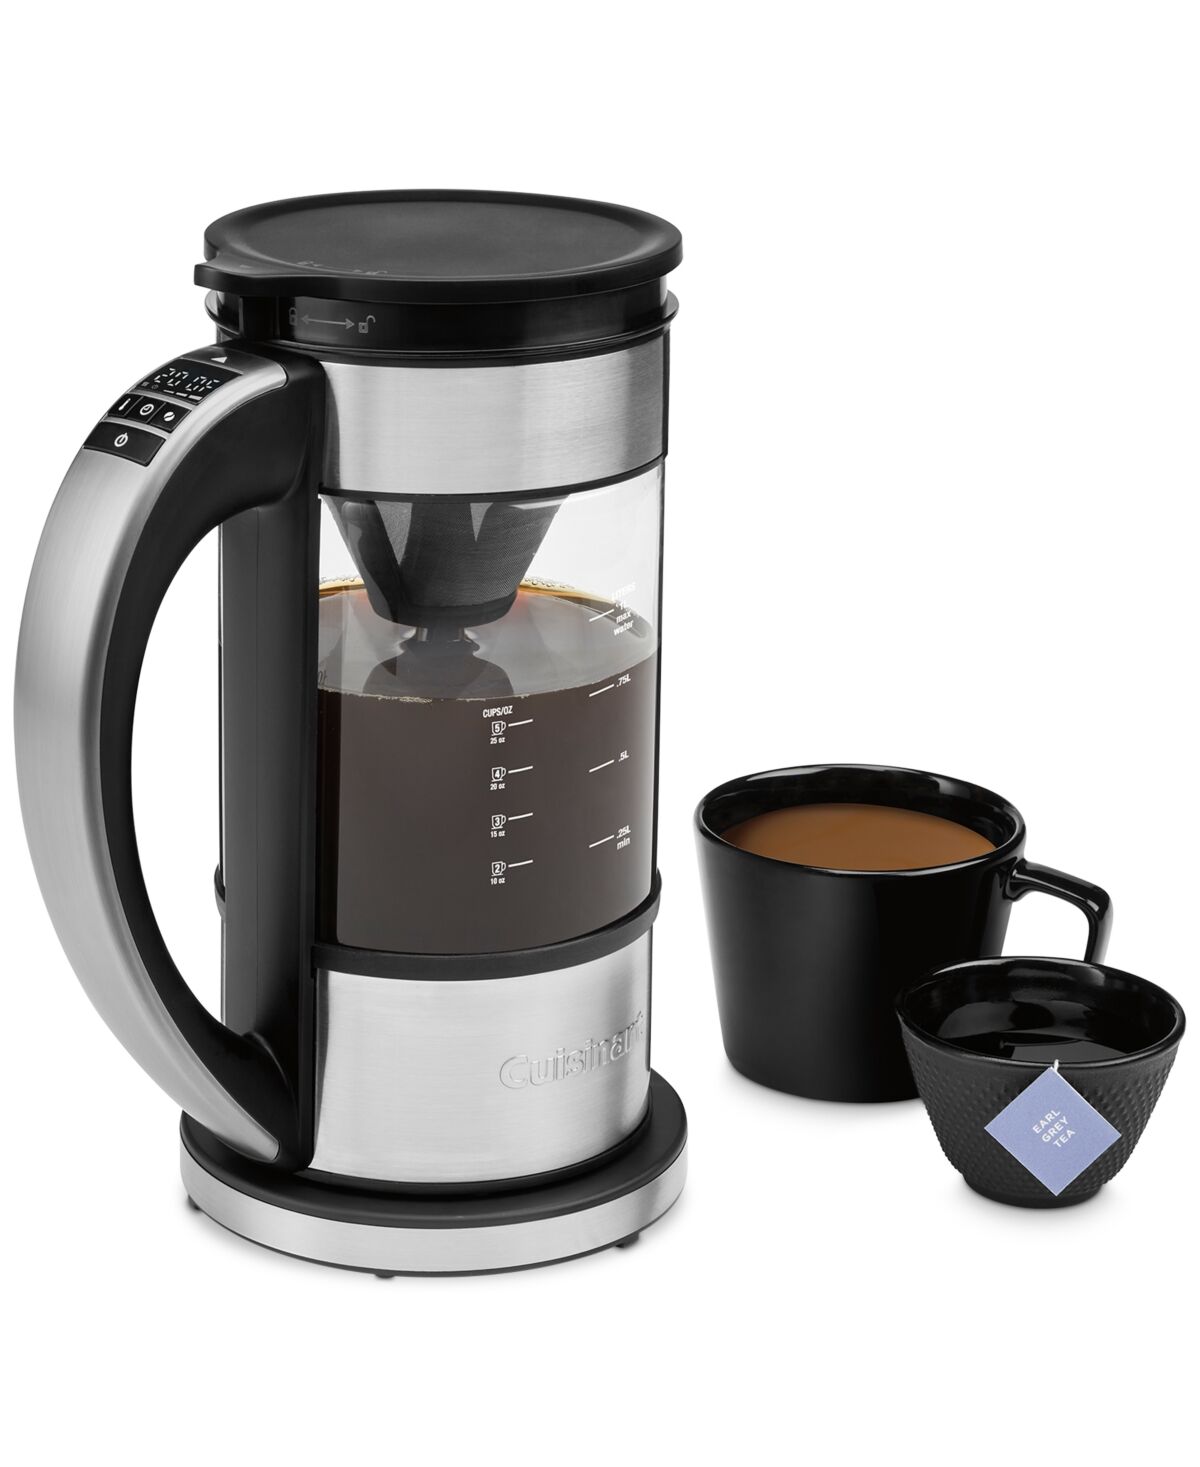 Cuisinart Programmable 5-Cup Percolator & Electric Kettle - Stainless/black